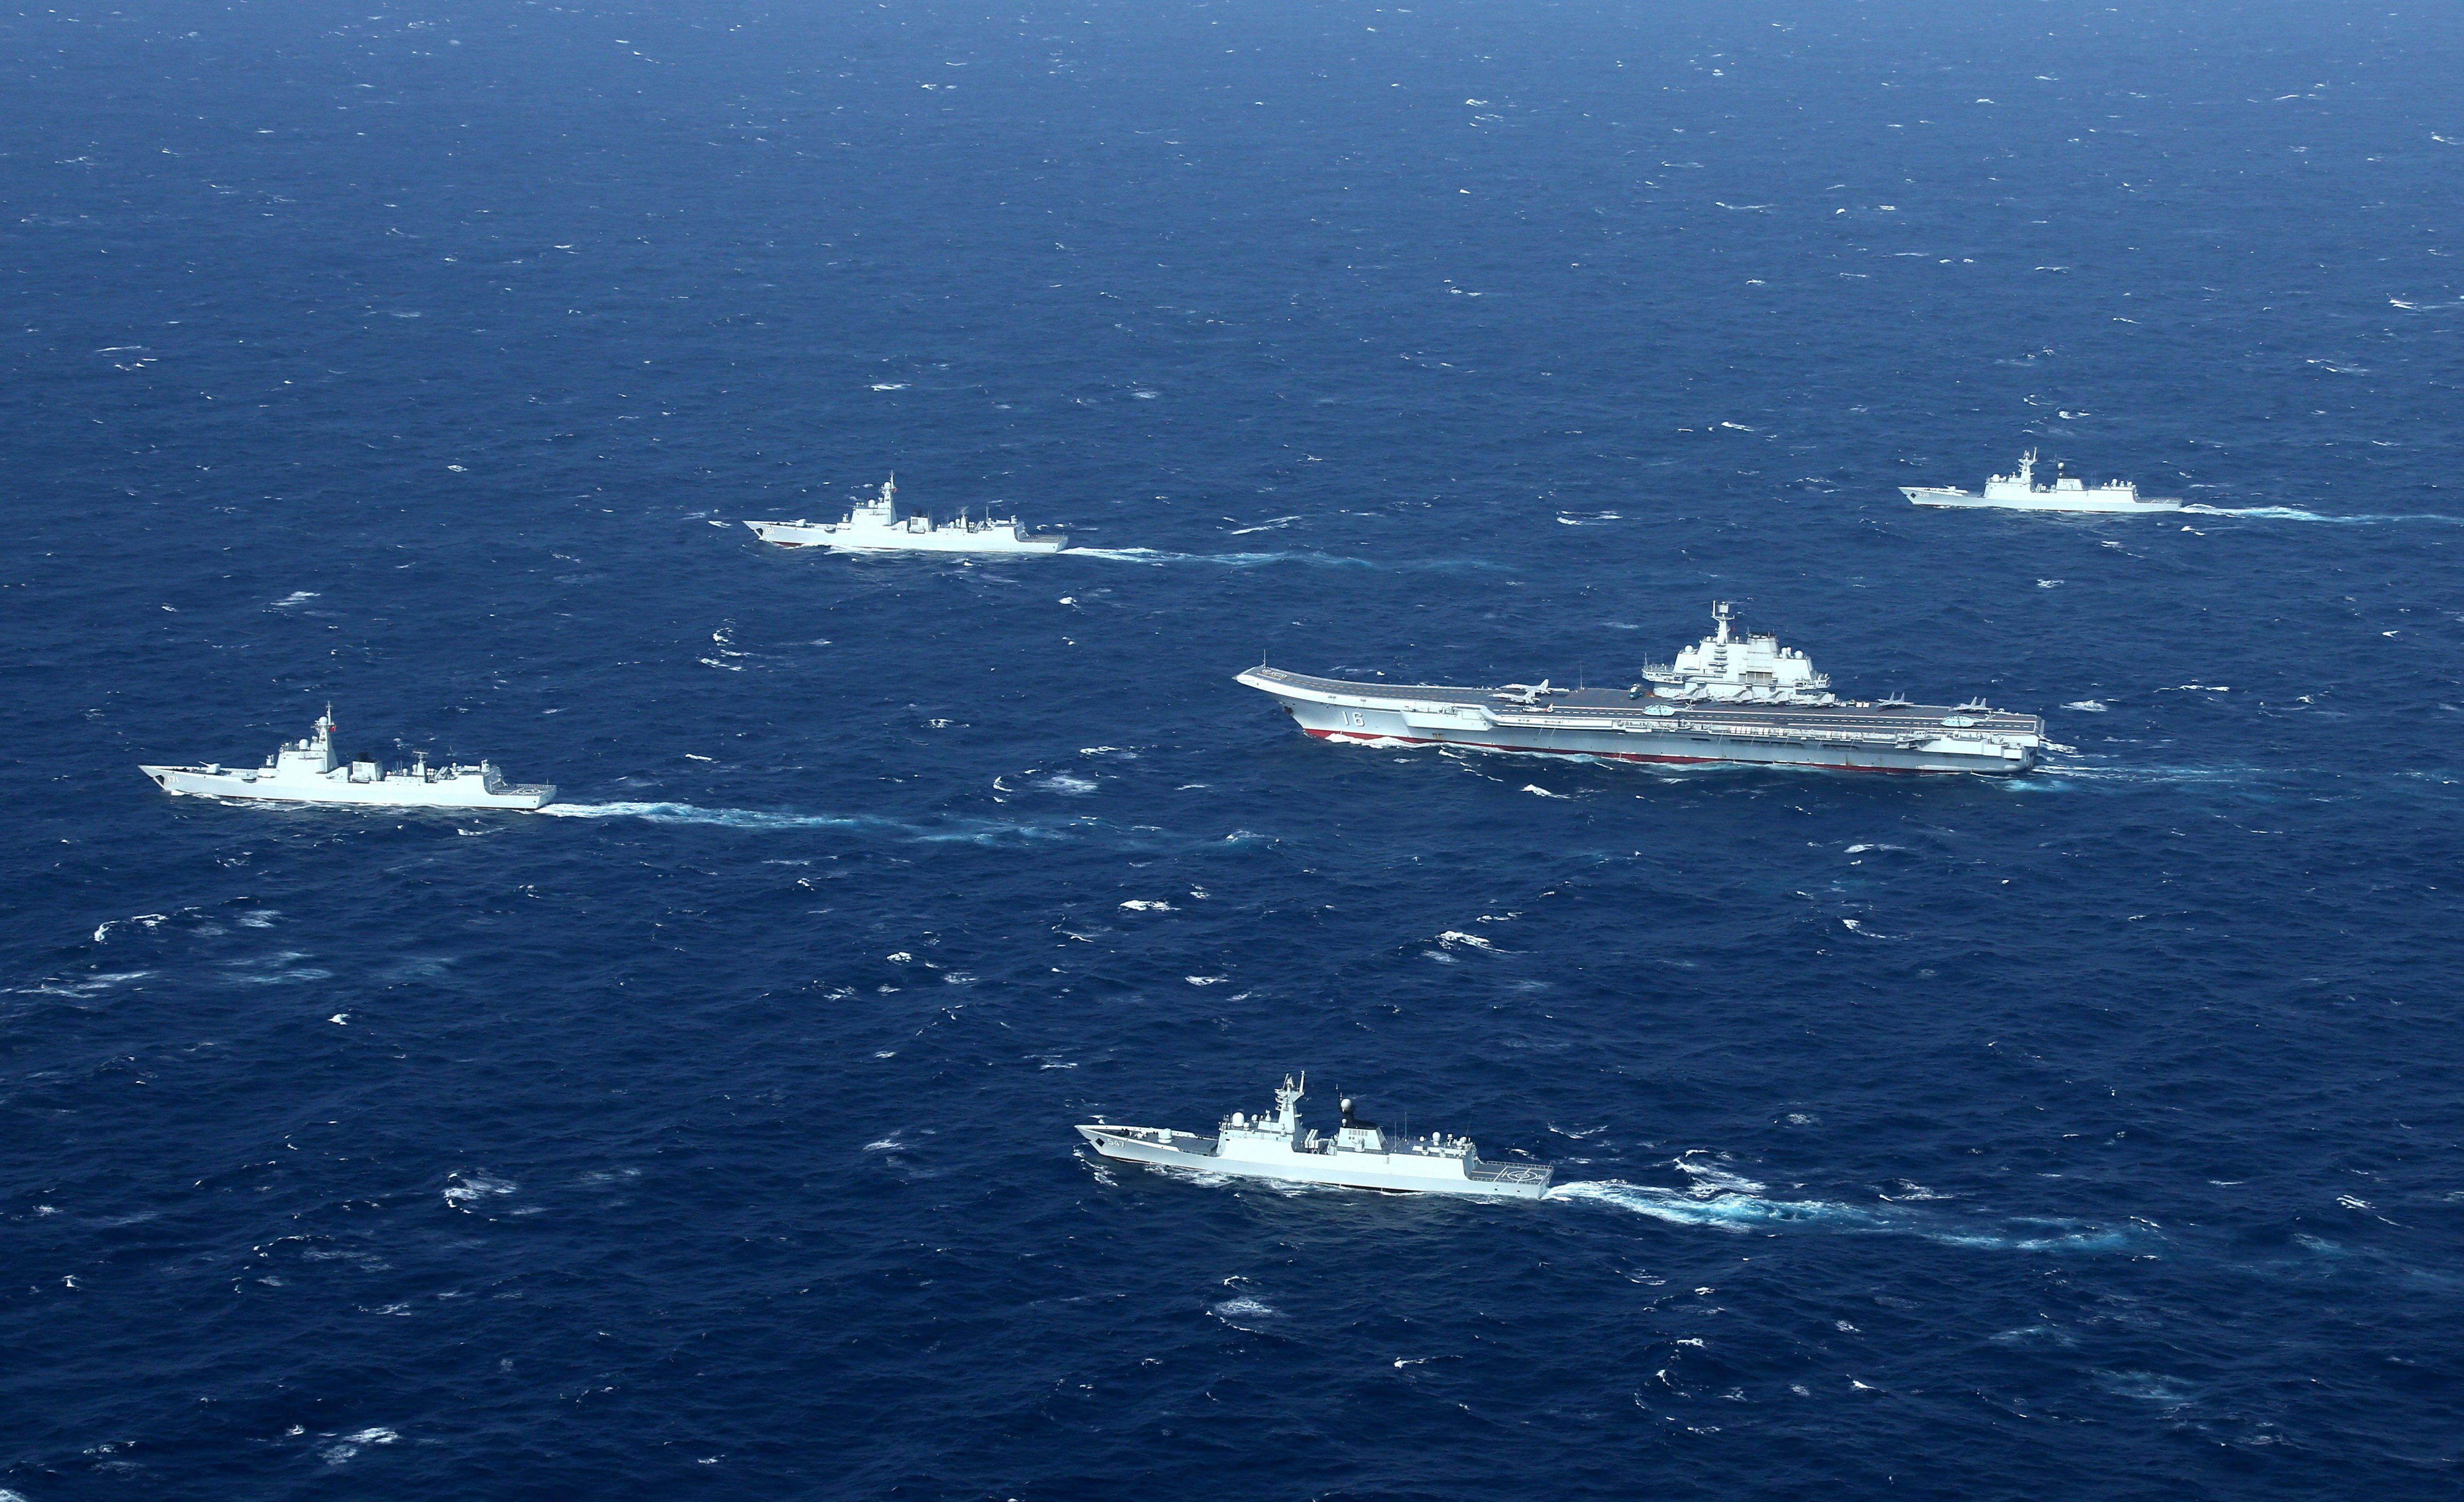 Beijing Is Winning the Battle to Control the South China Sea | Time